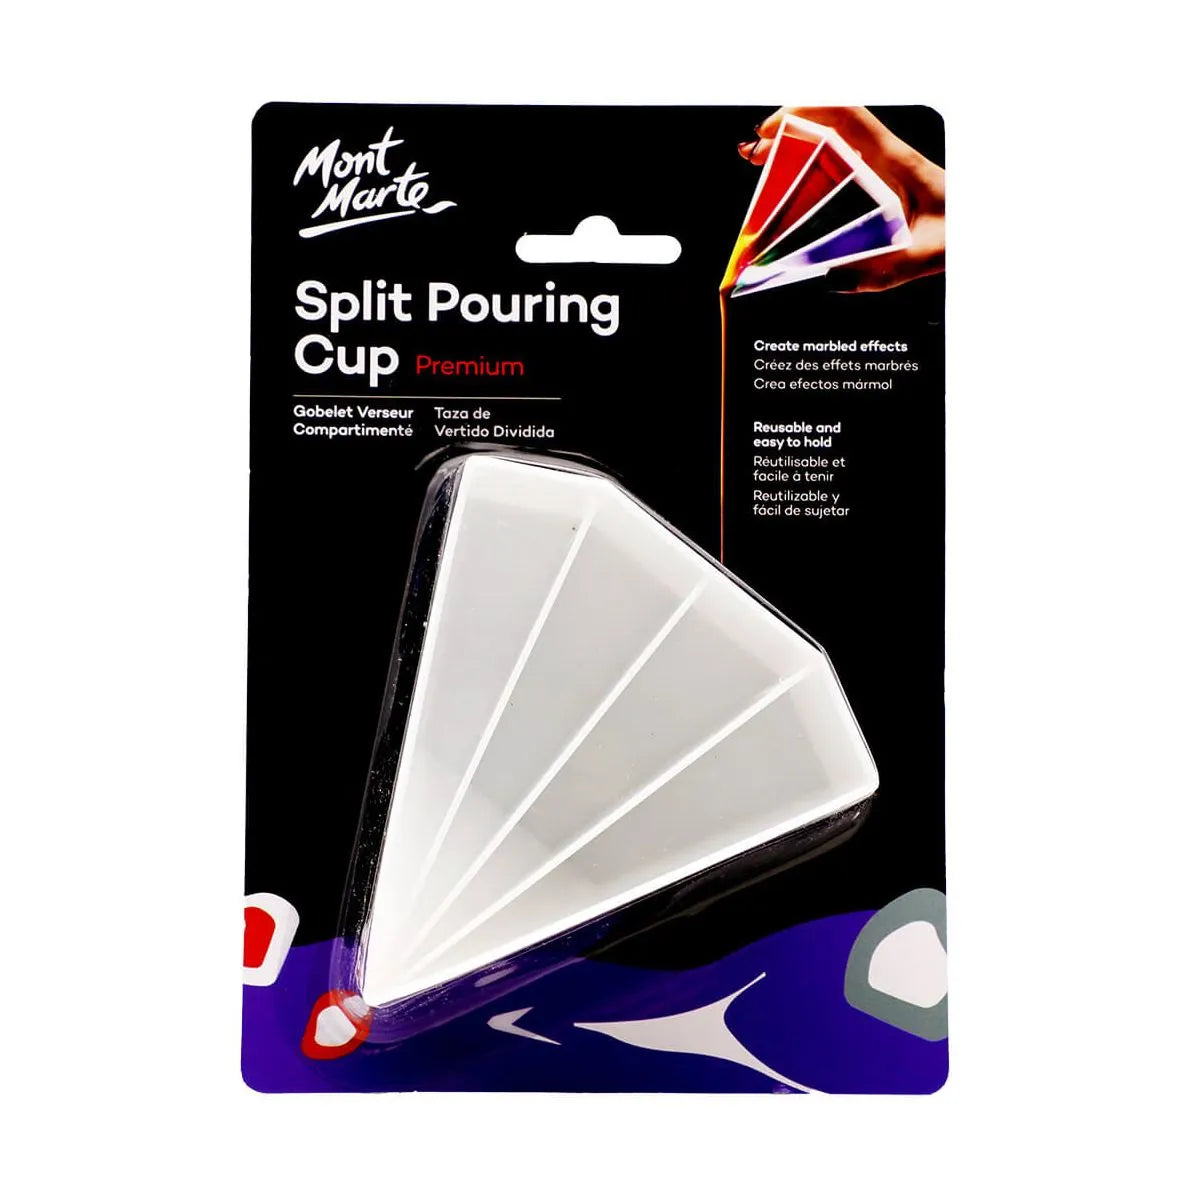 Split pouring cup